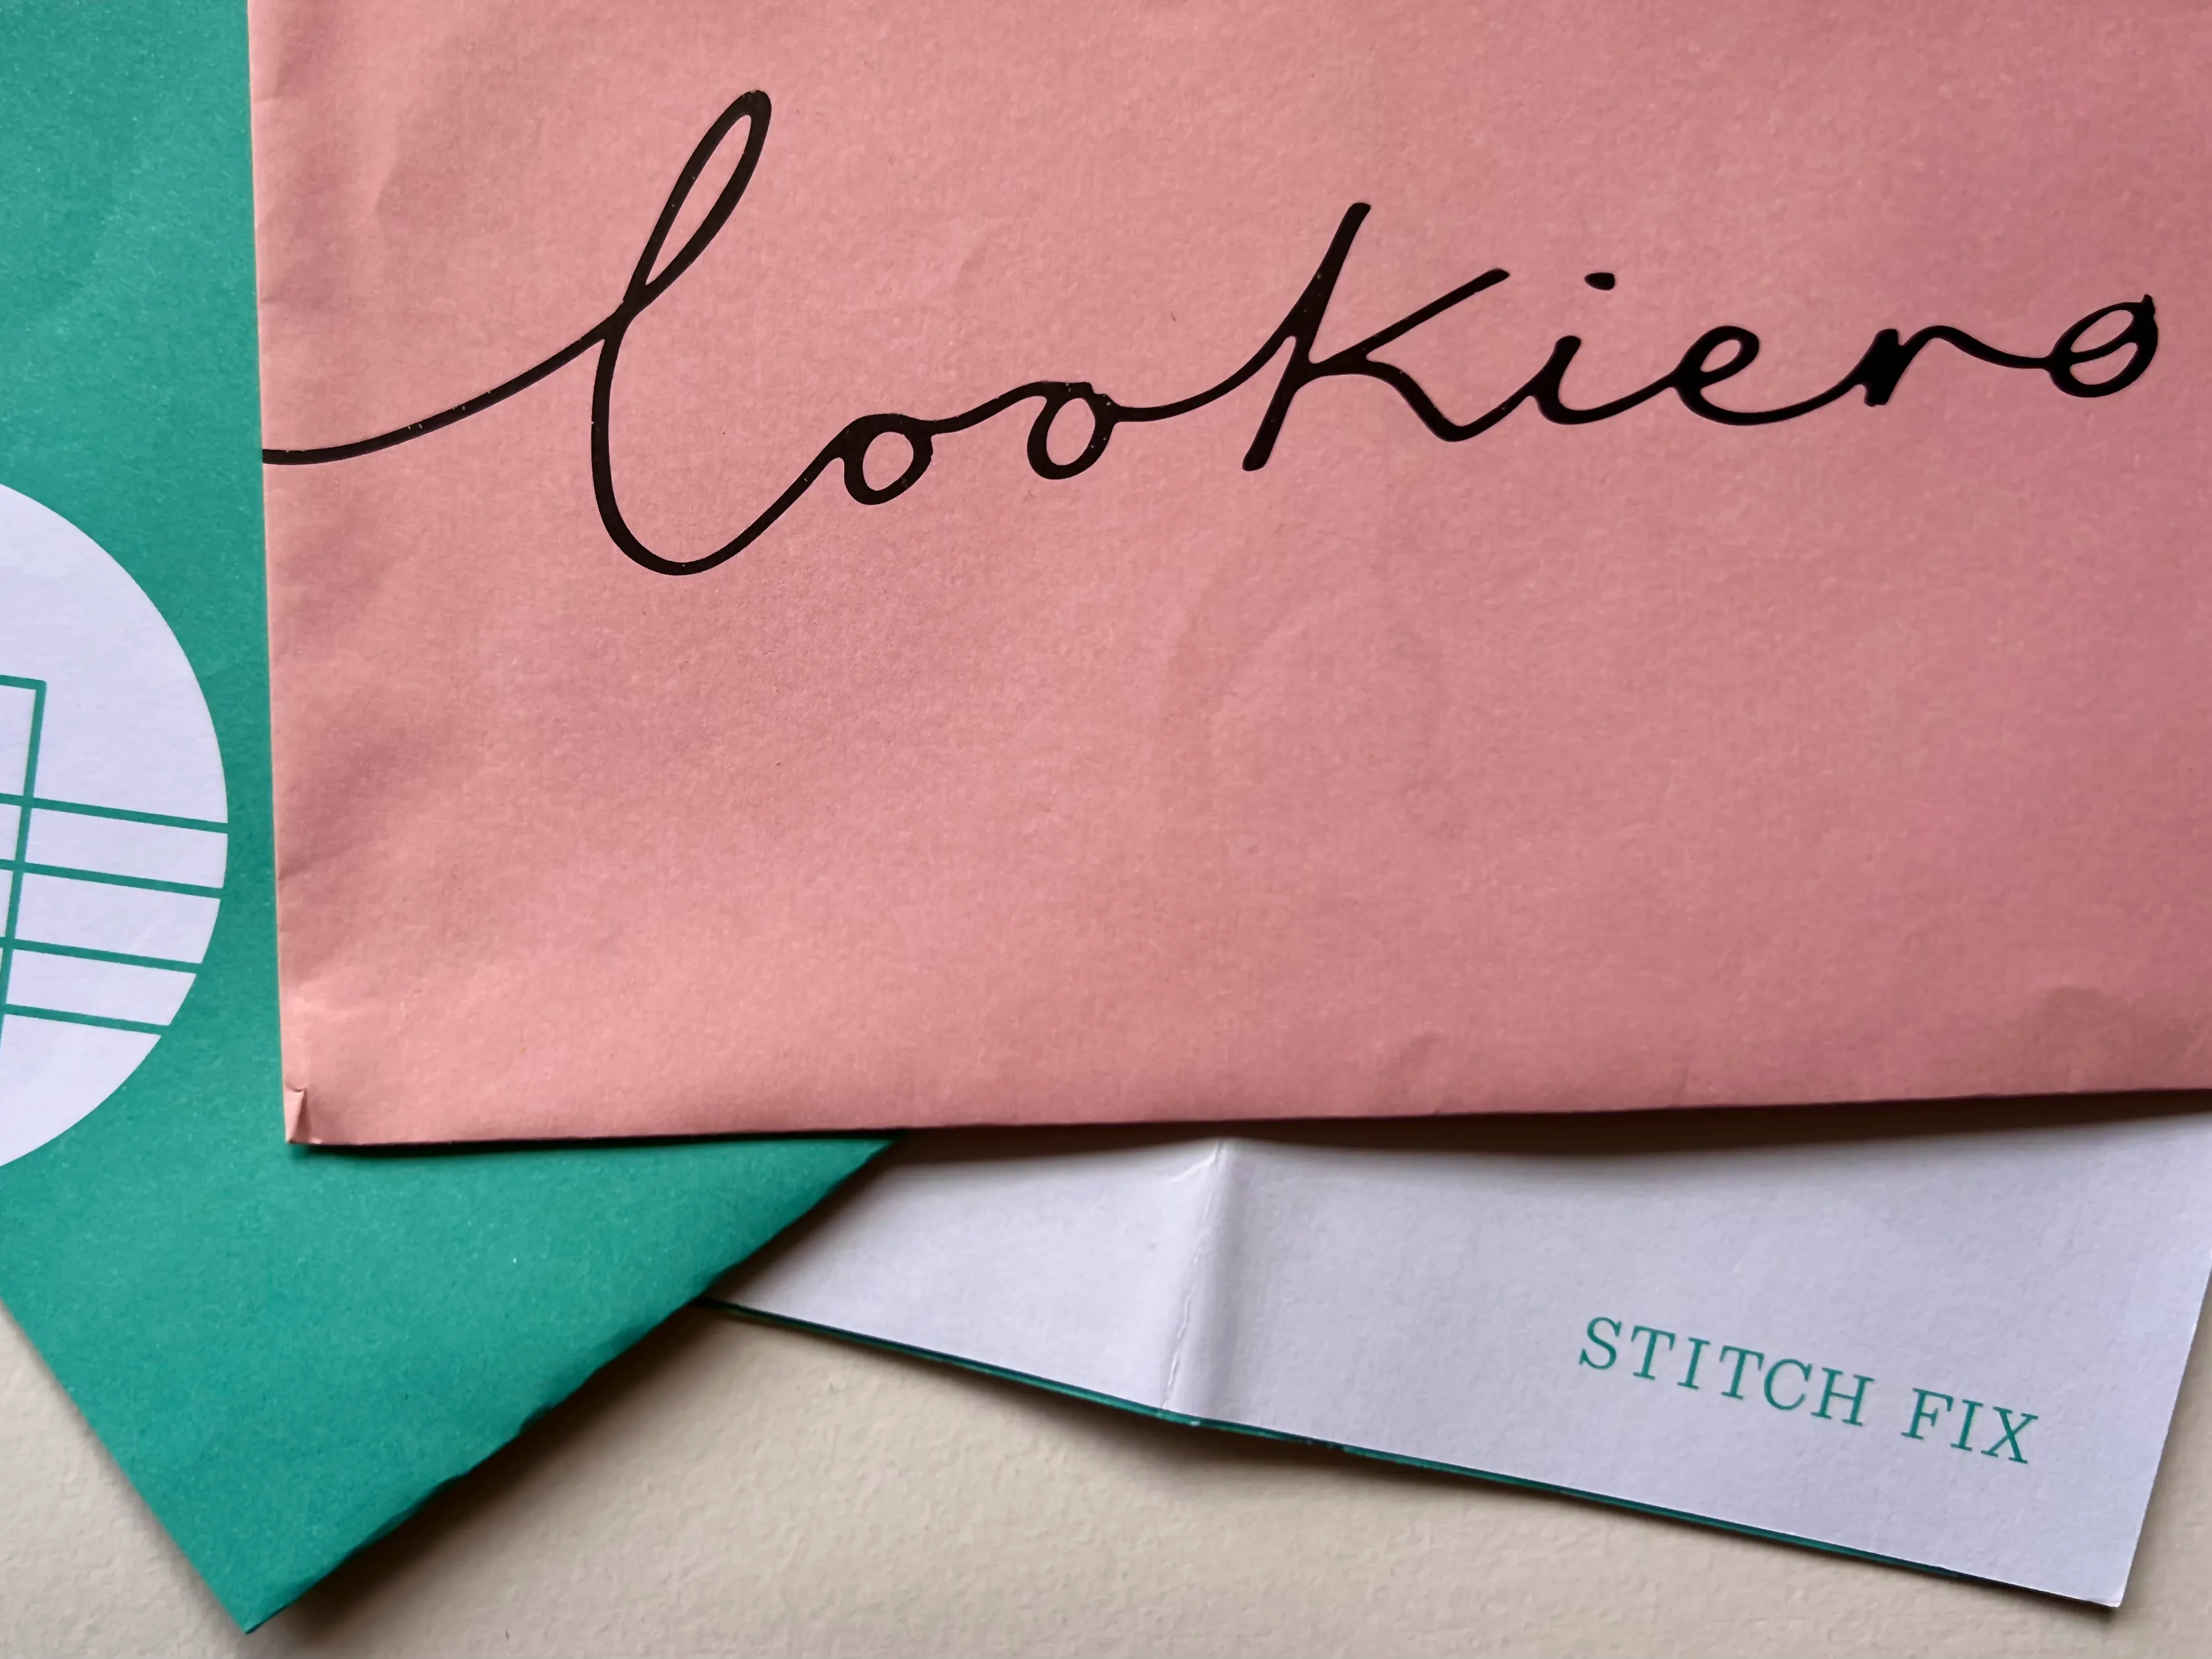 Envelopes with stitch fix and lookiero written on them